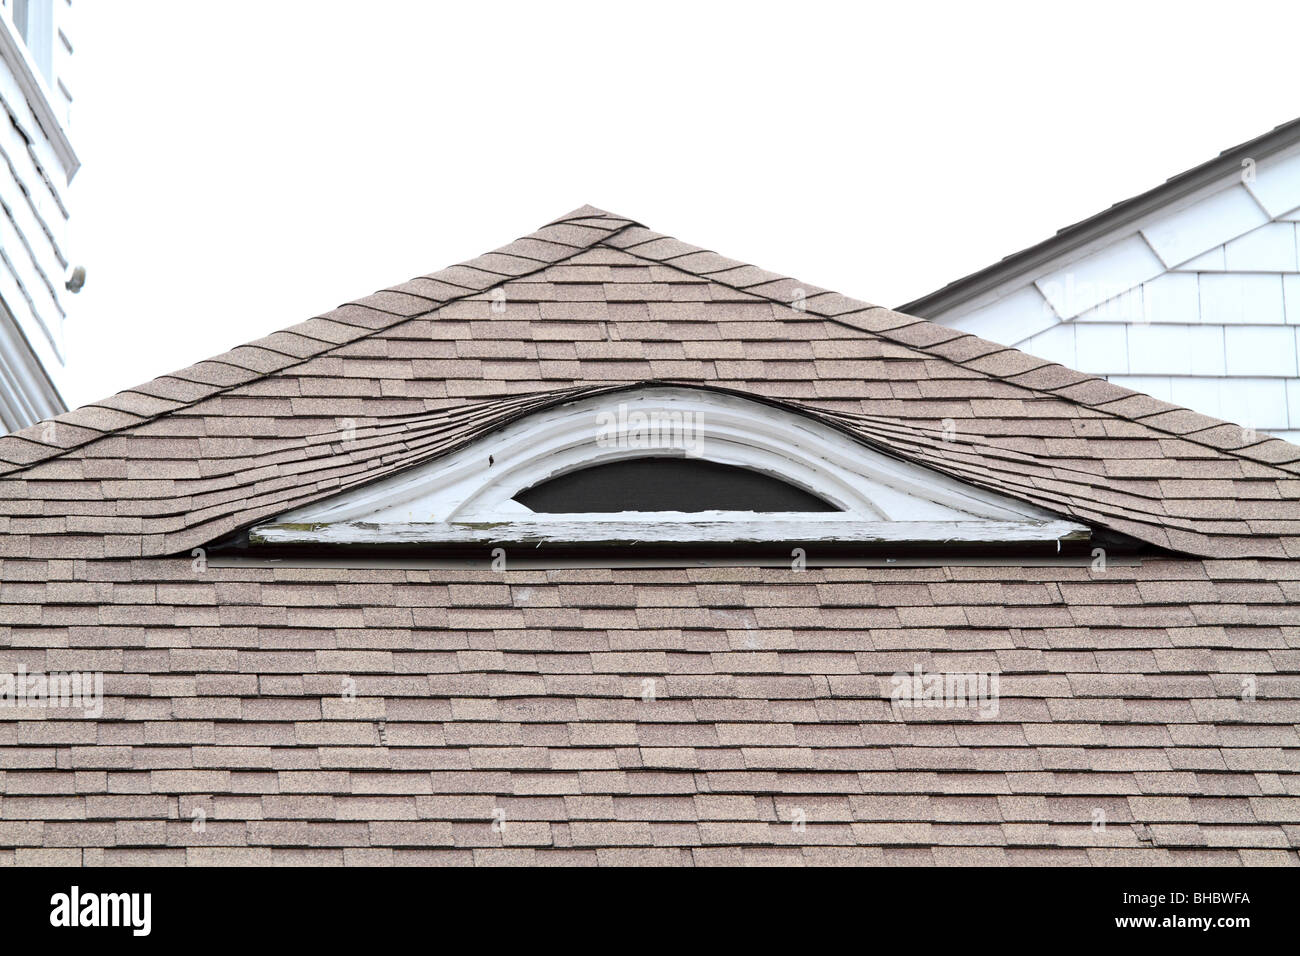 Eyebrow dormer windows show the architecture of an old house. Stock Photo